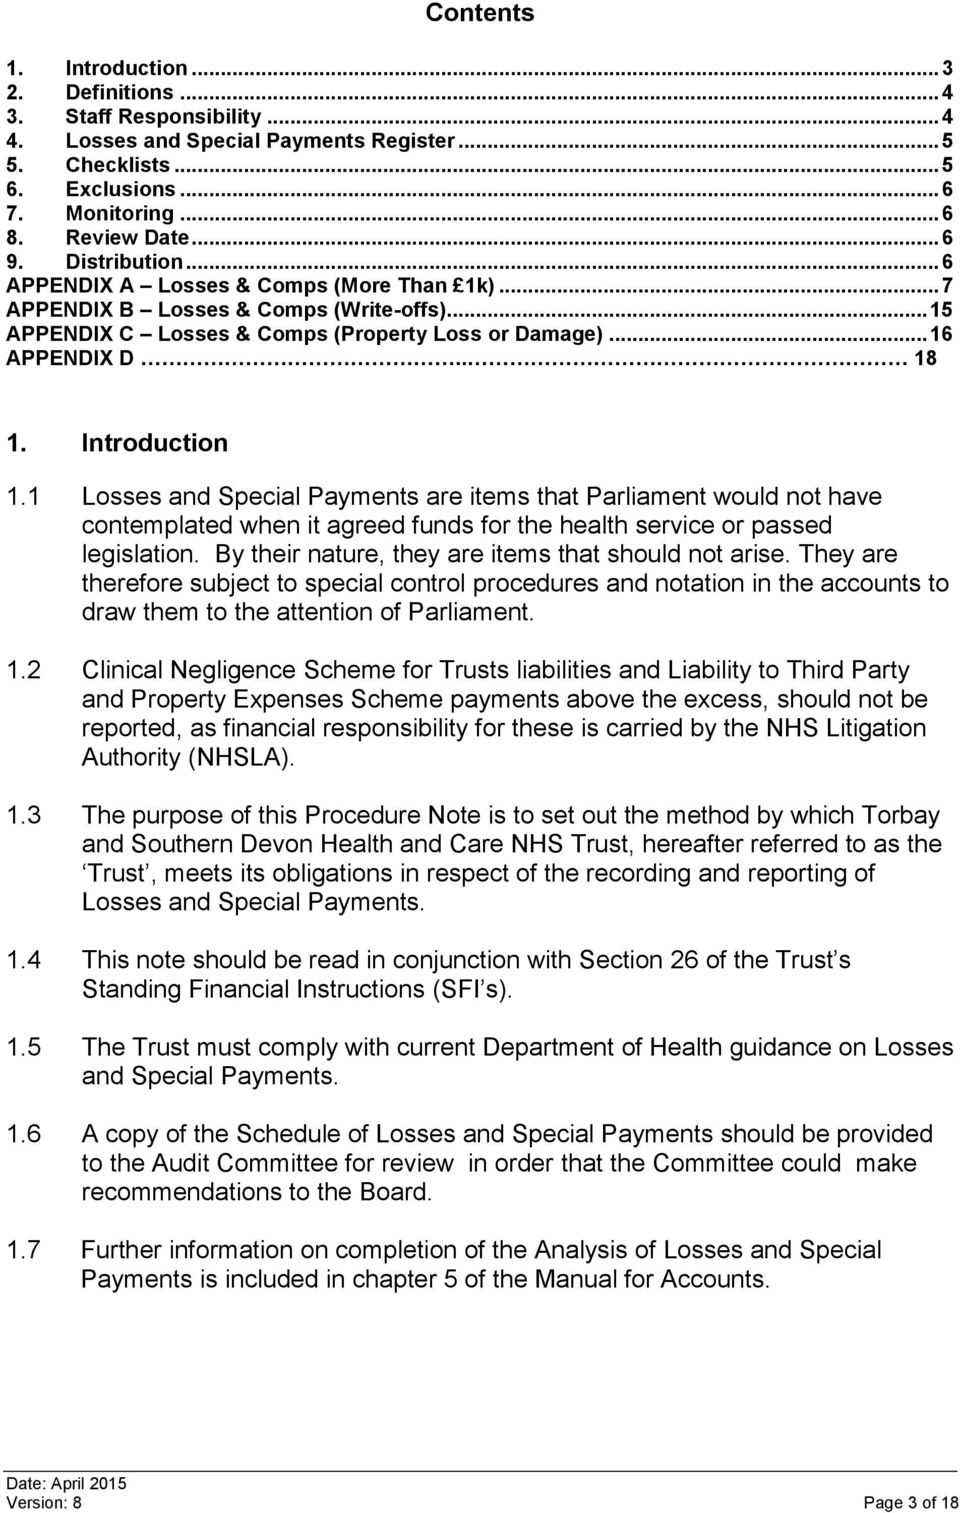 Introduction 1.1 Losses and Special Payments are items that Parliament would not have contemplated when it agreed funds for the health service or passed legislation.